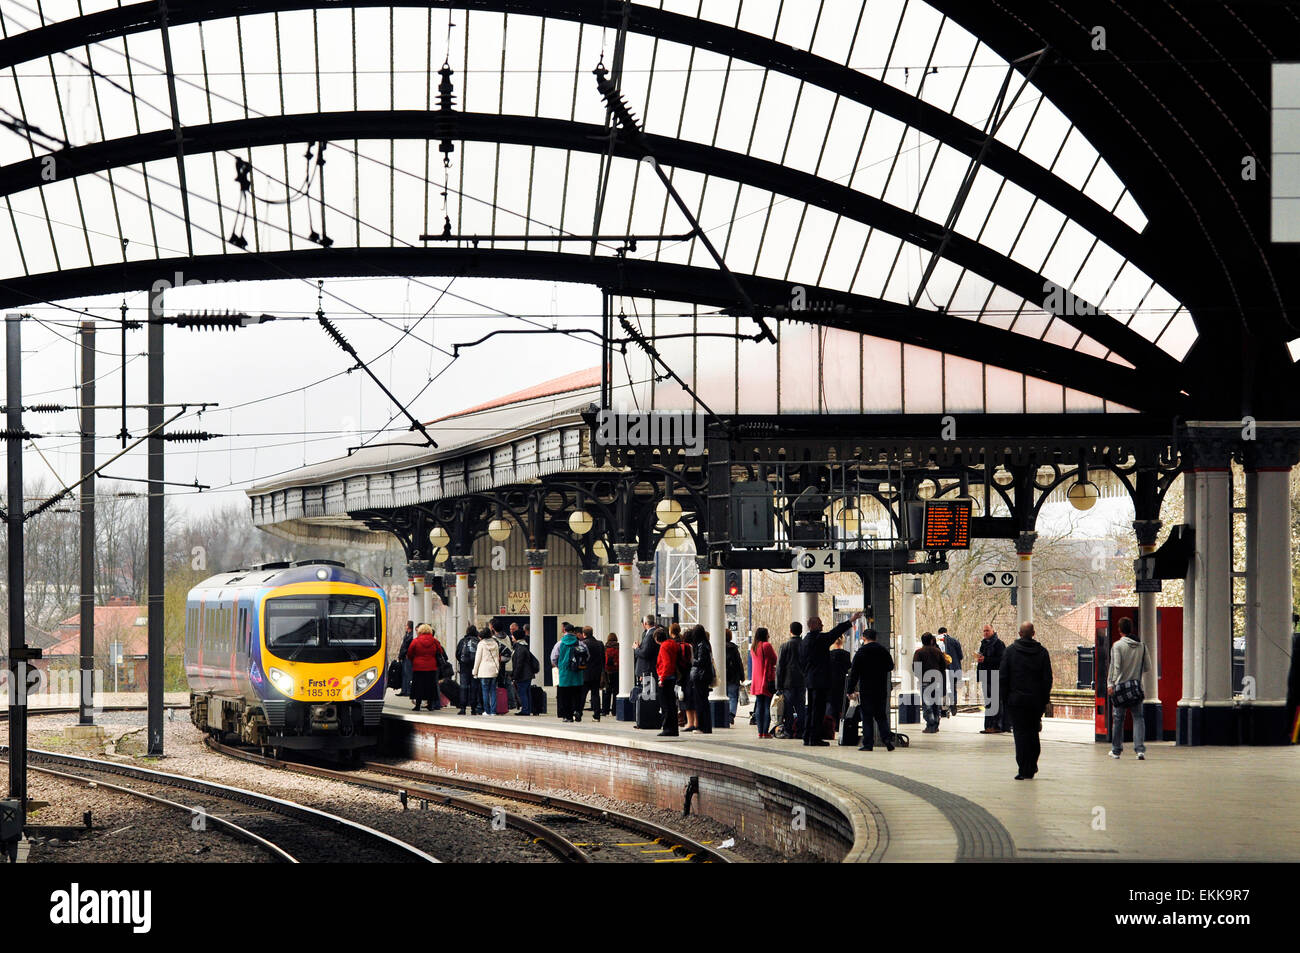 YORK, UK - APRIL 2010: Train of the FirstGroup, a British transport group, arrives at York Railway Station. Stock Photo